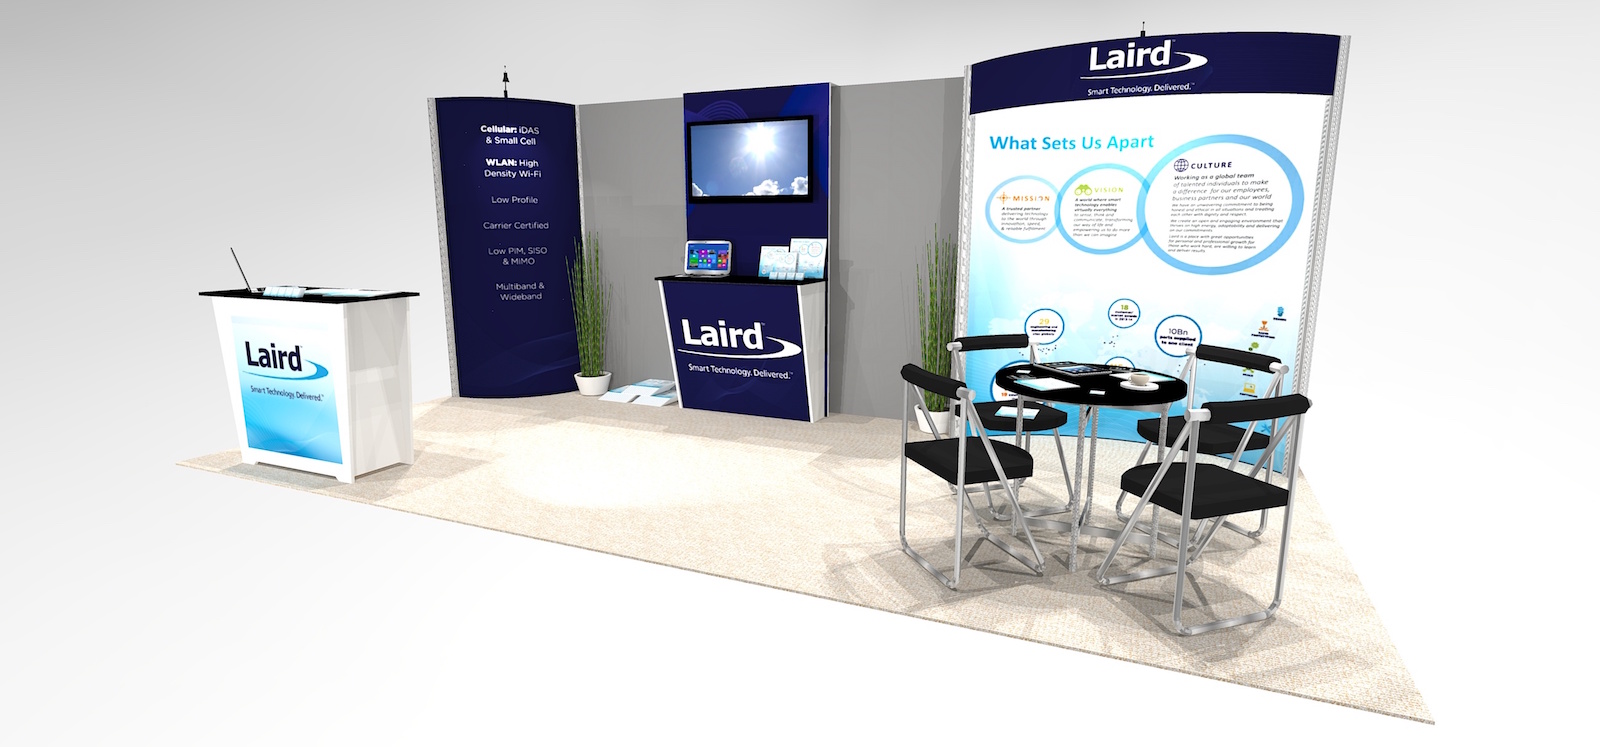 IM3_Trade-show-design-with-storage-meeting-space-overhead-custom-lighted-product-display-and-large-trade-show-graphic-area-view-2